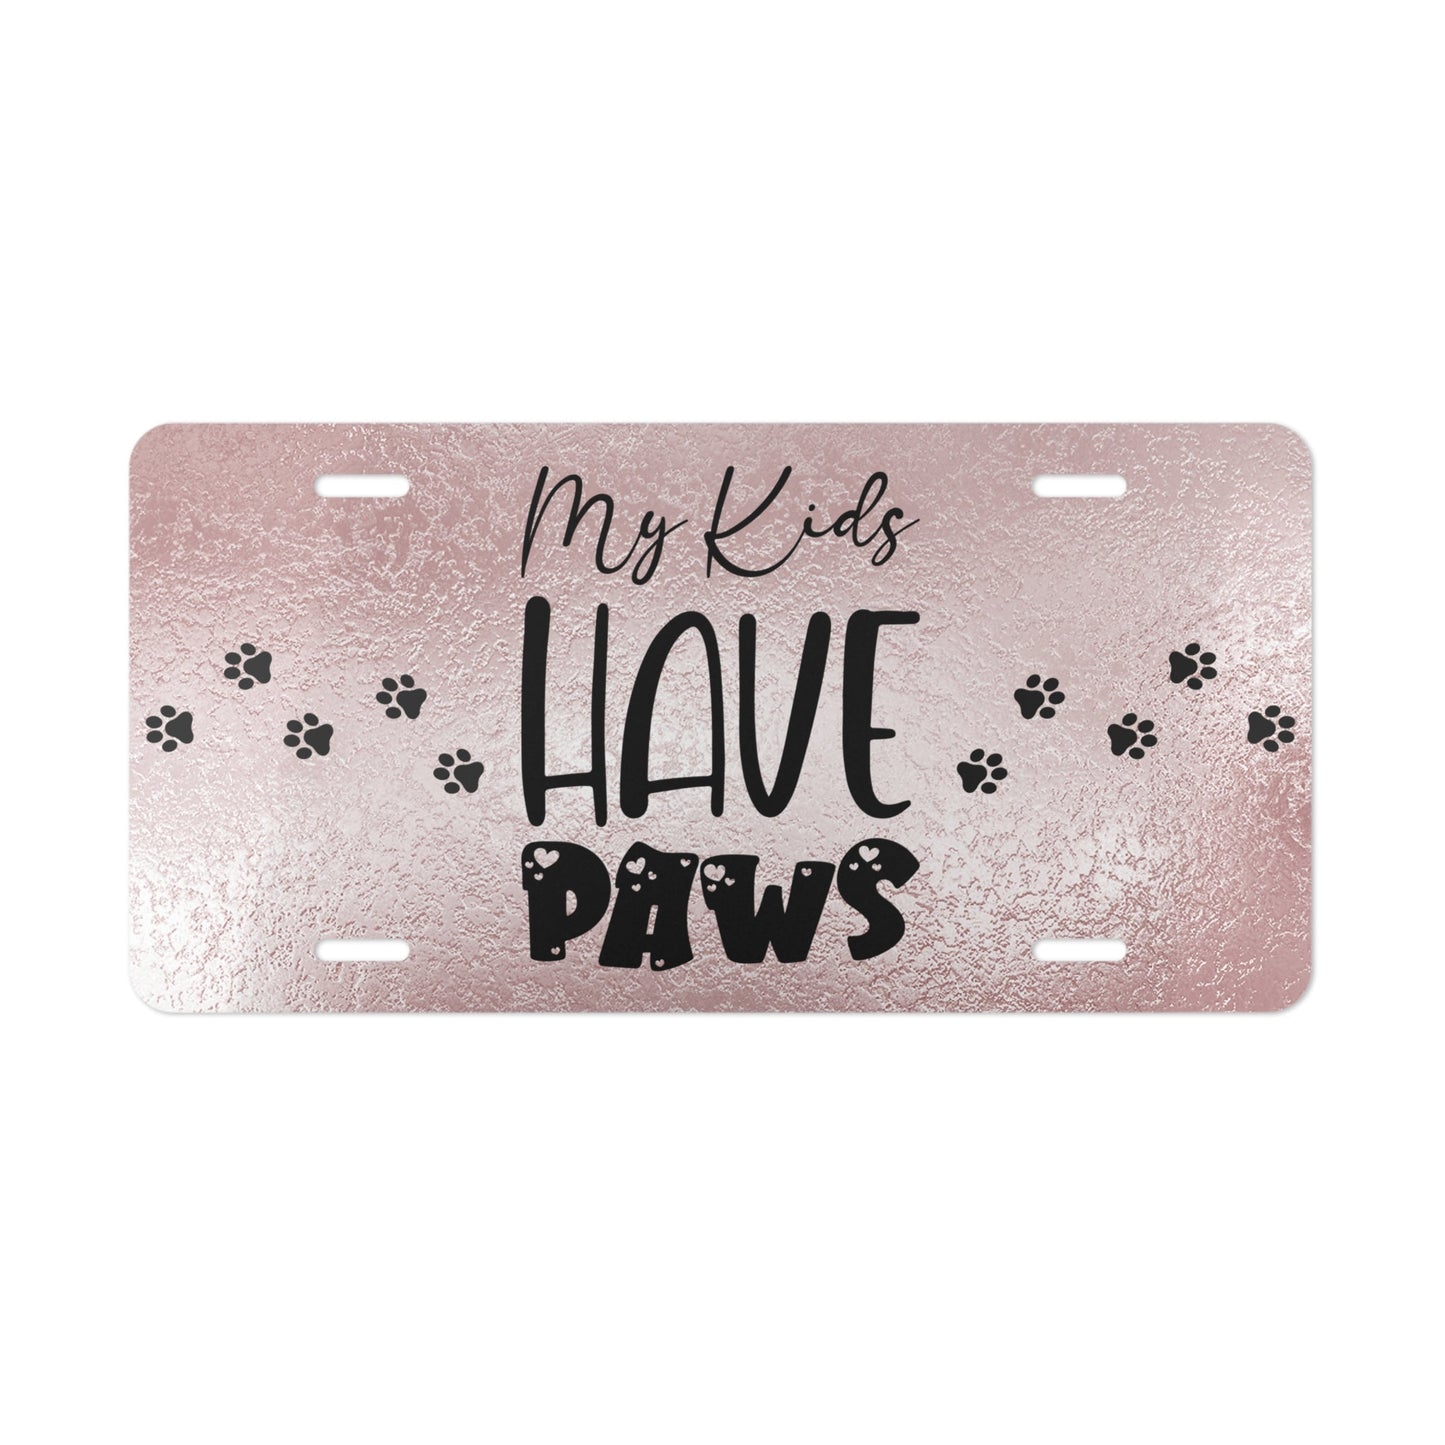 My Kids Have Paws Vanity Plate - Accessories - Epileptic Al’s Shop